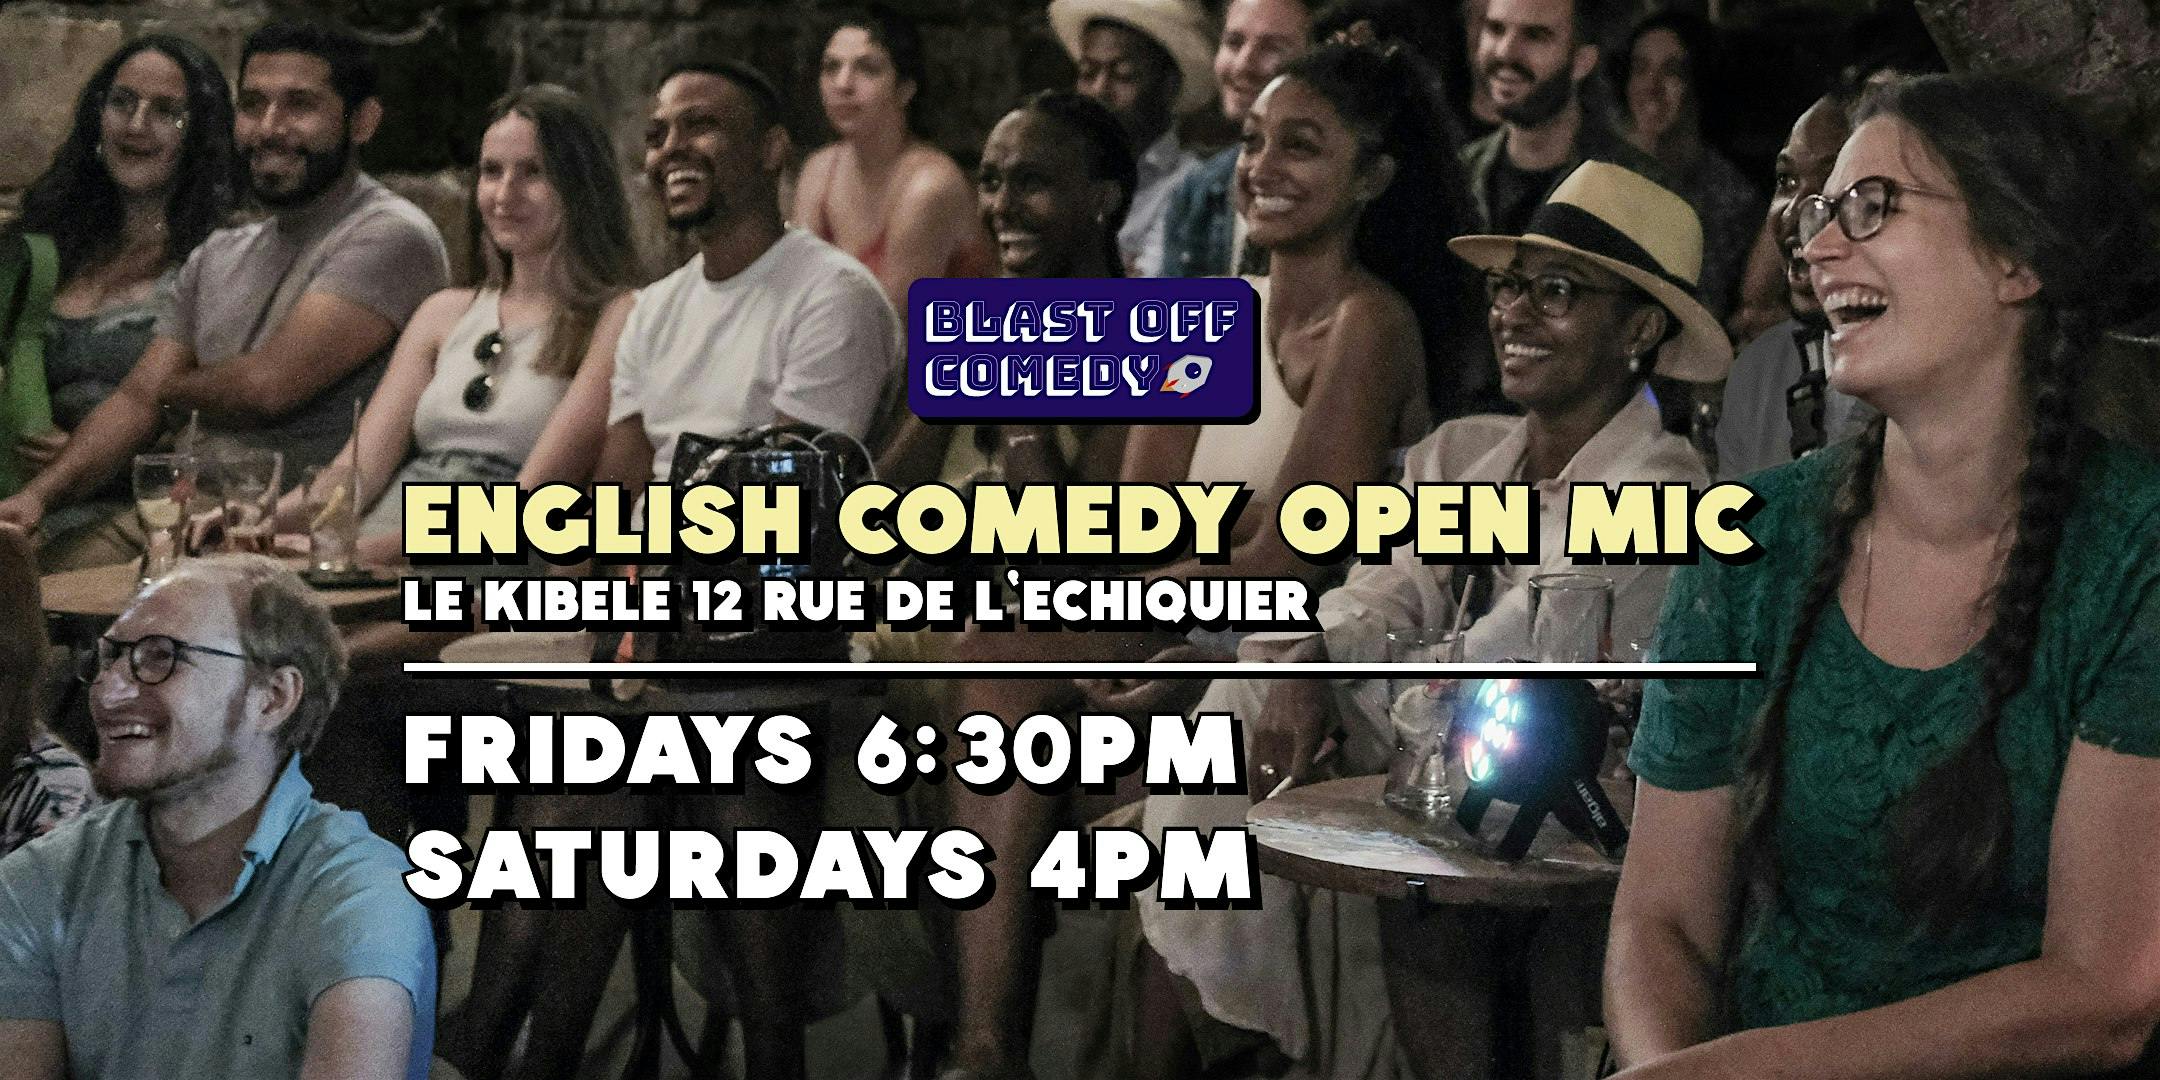 English Stand Up Comedy - Weekly Saturday Open Mic - Blast Off Comedy logo